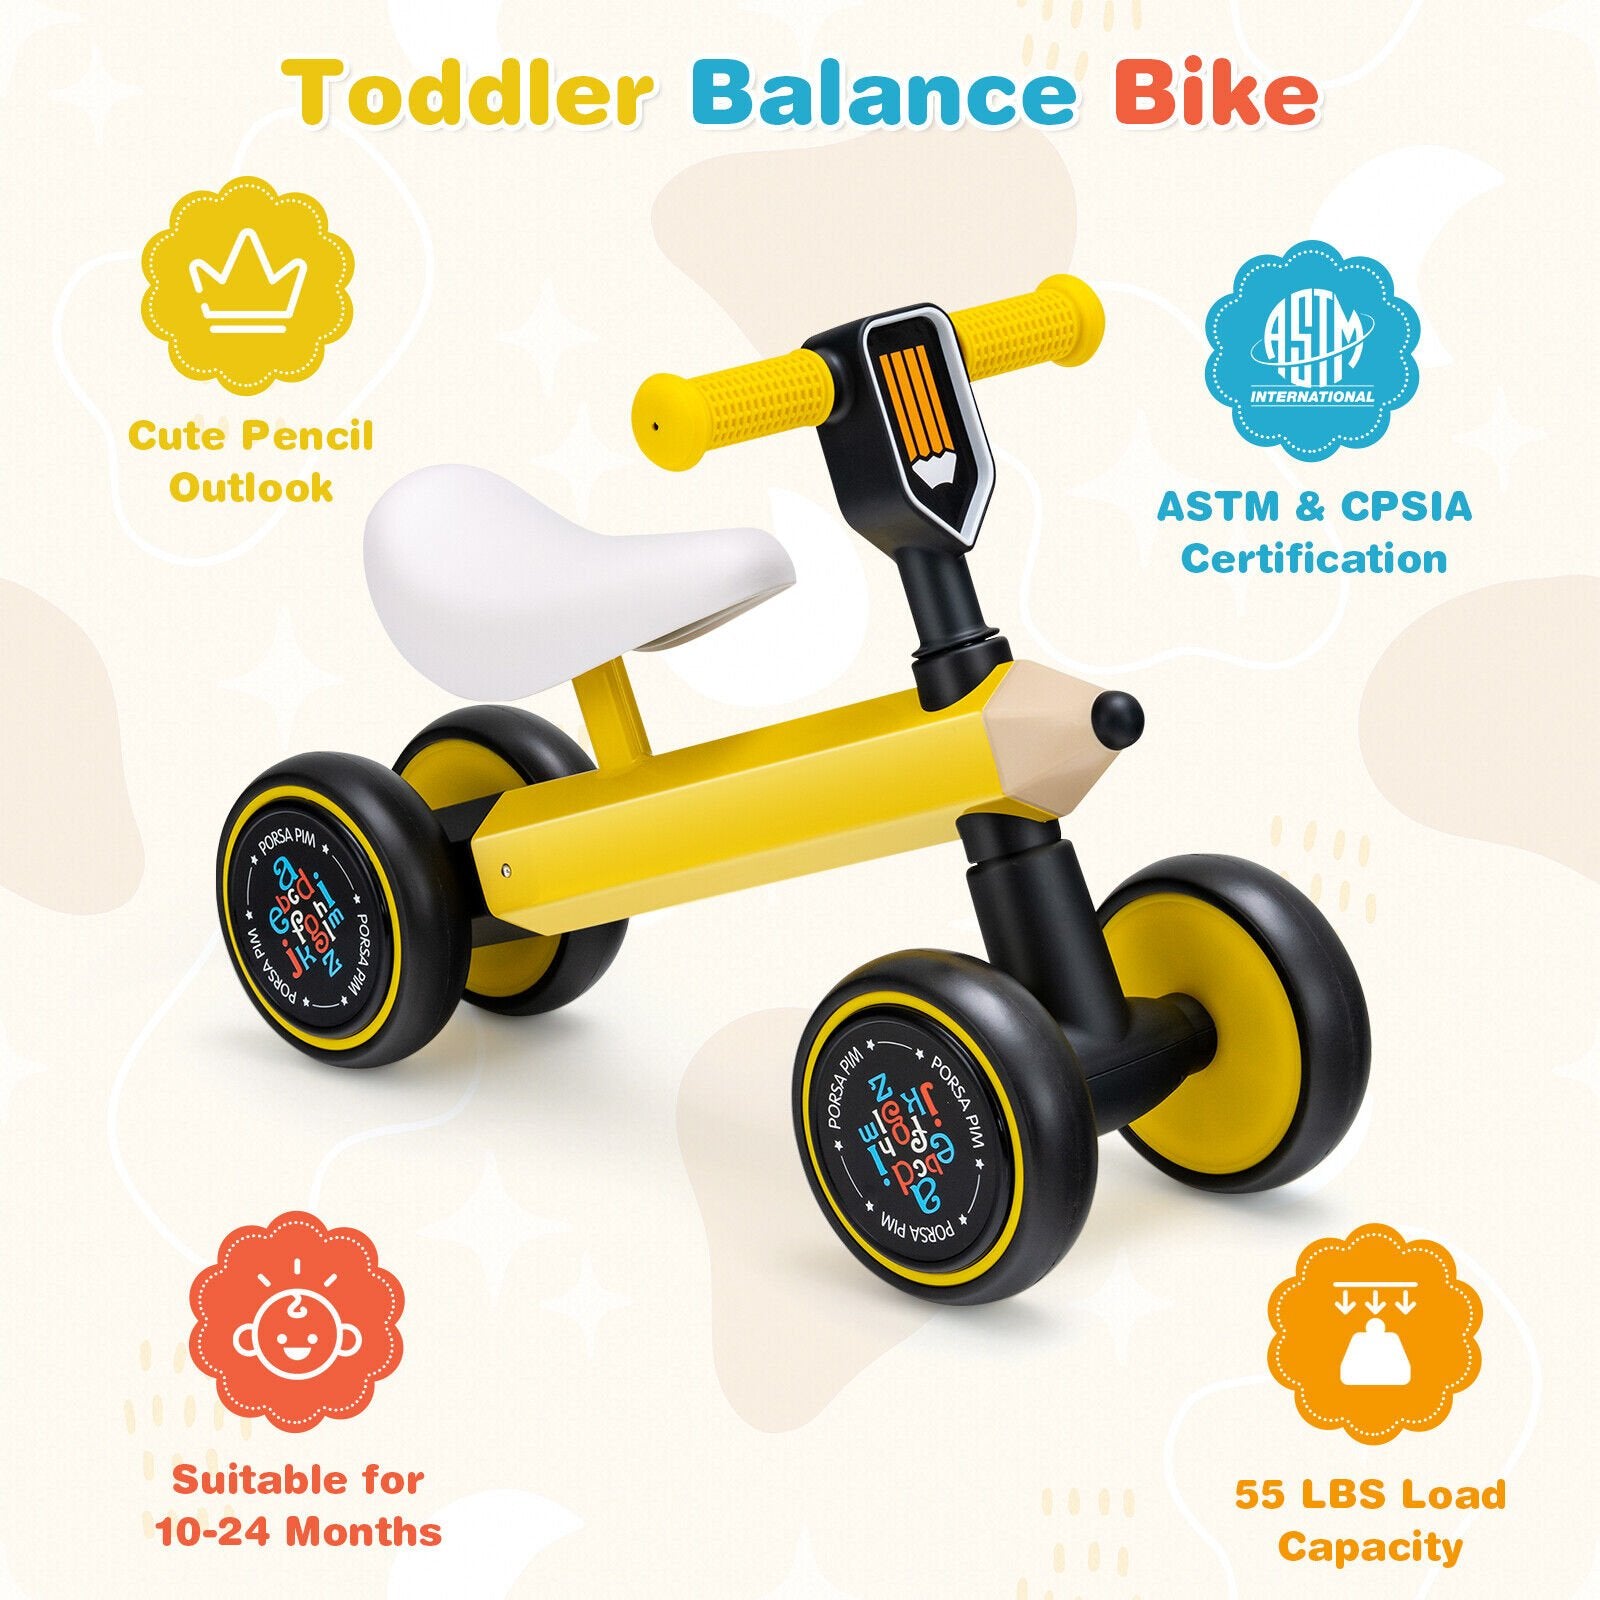 Baby Balance Bike with 4 Silent EVA Wheels and Limited Steering Wheels, Yellow Balance Bikes   at Gallery Canada